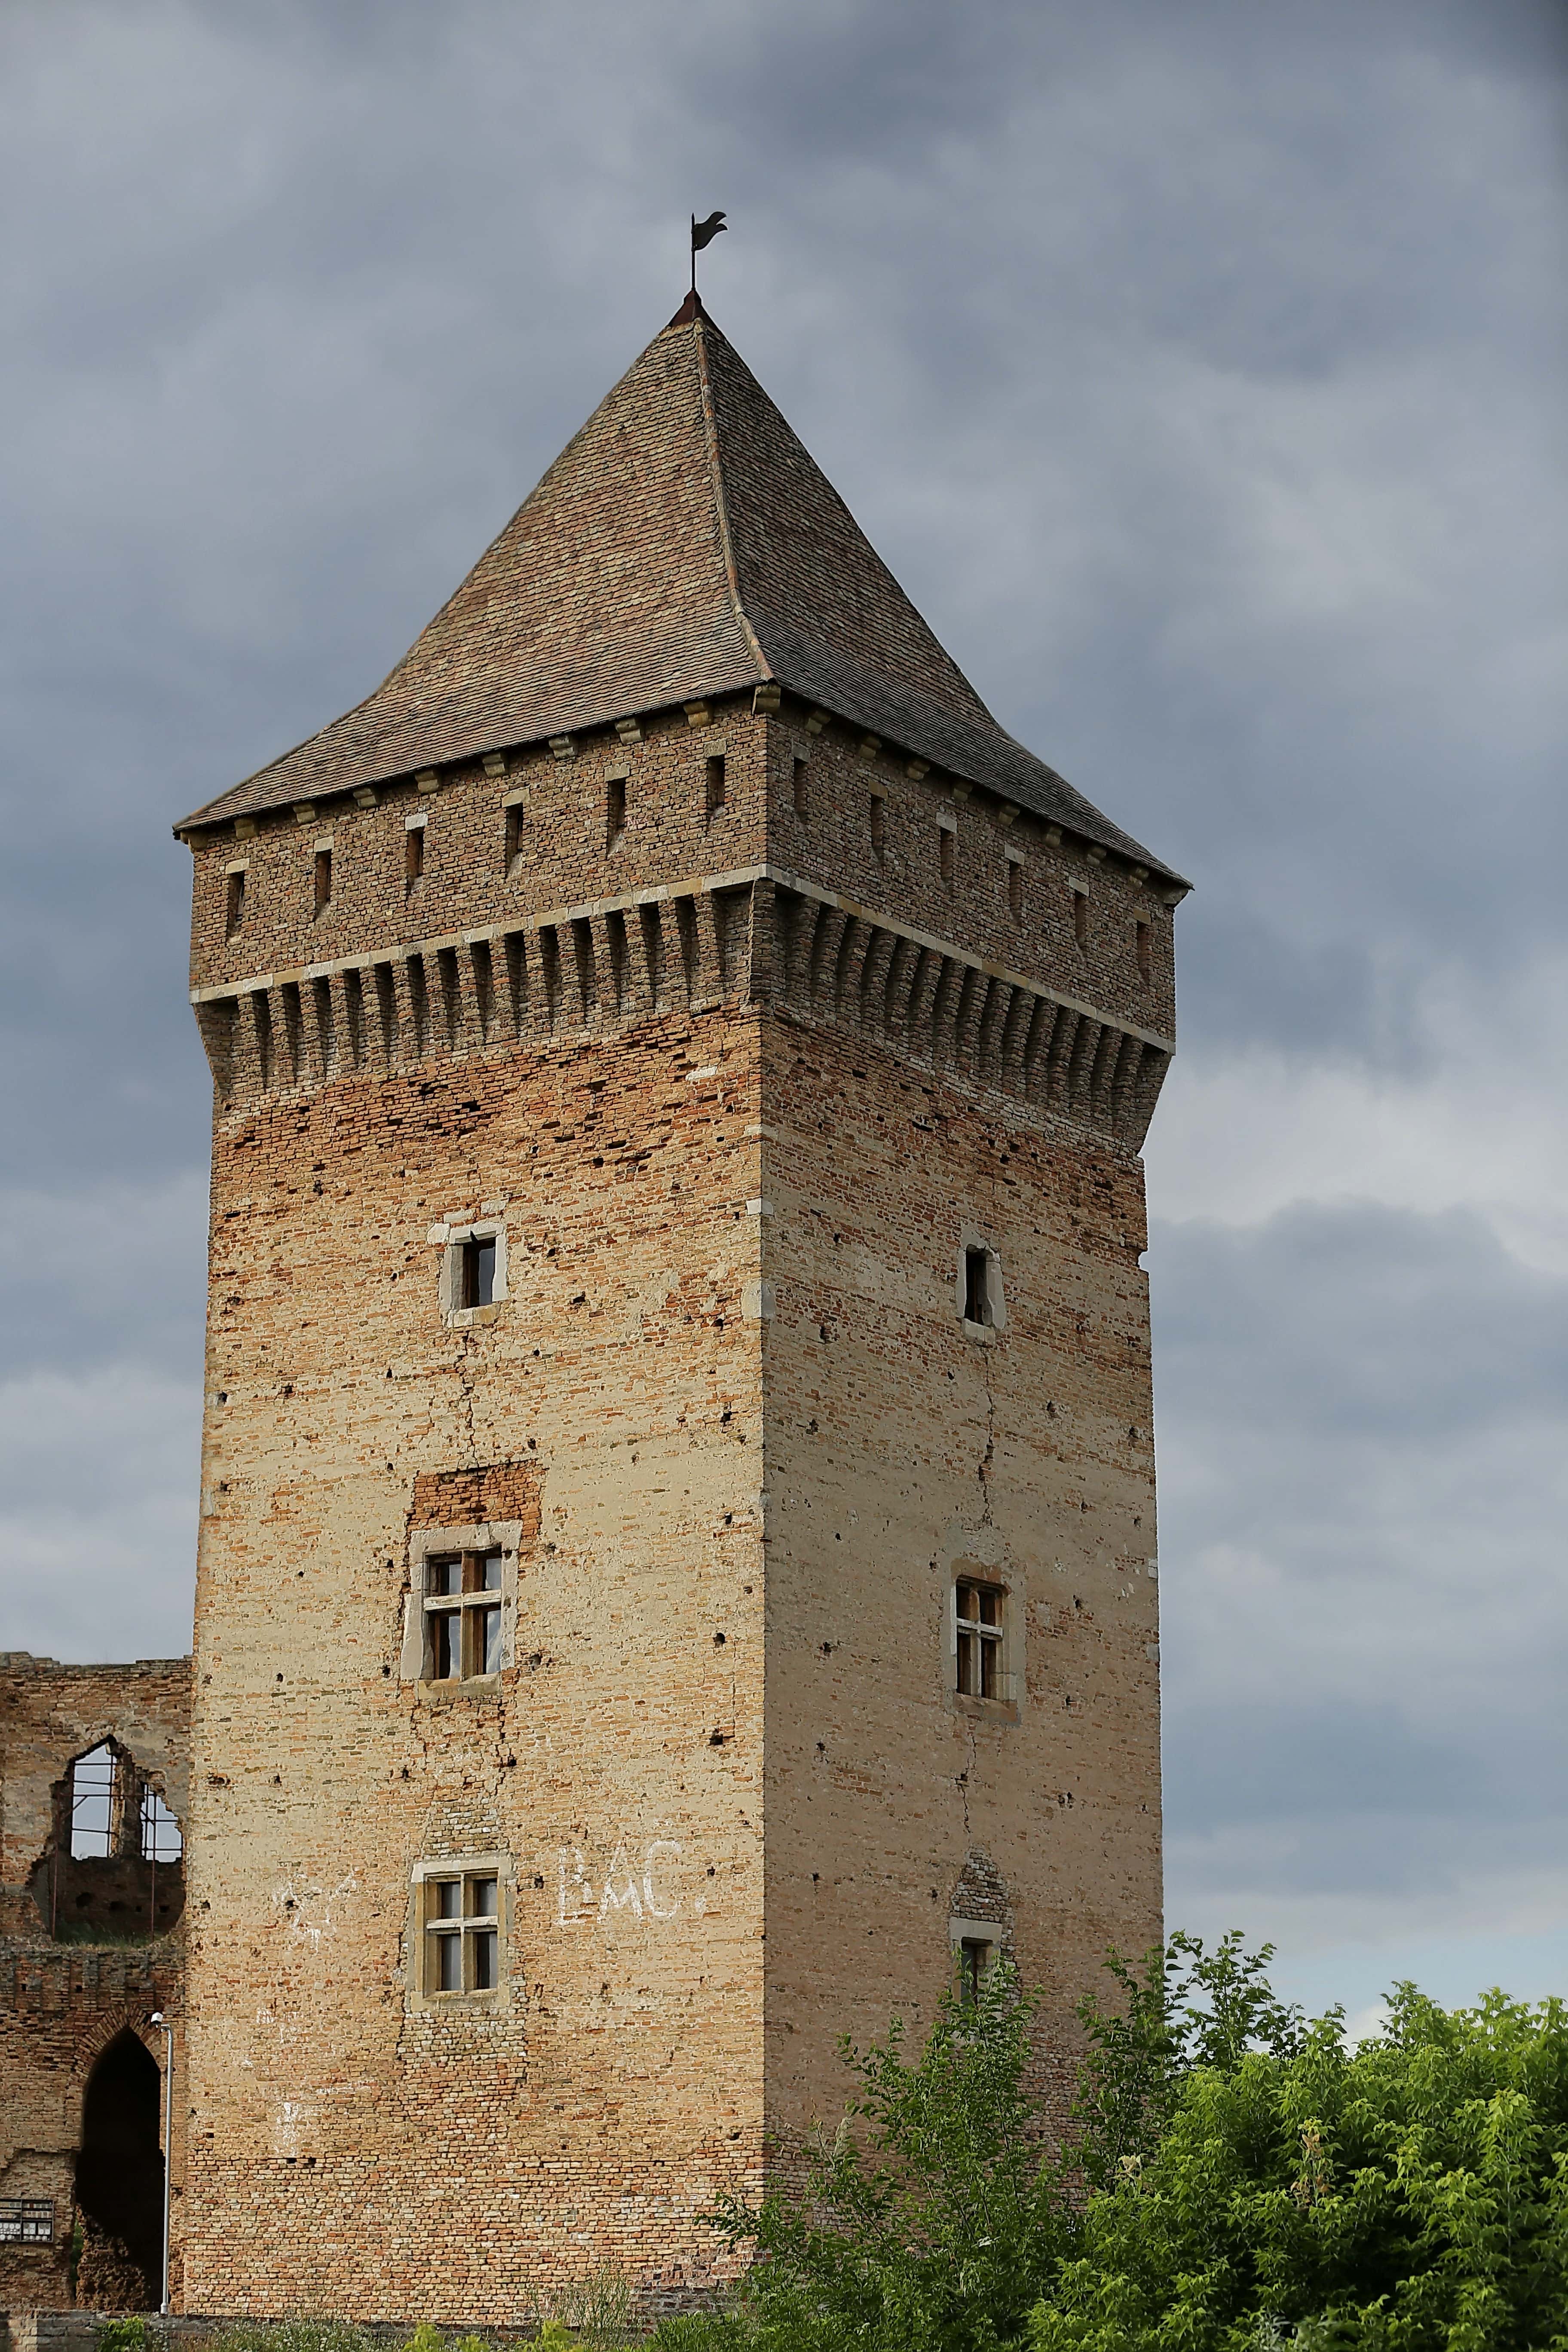 Free picture: castle, tower, architectural style, medieval, old